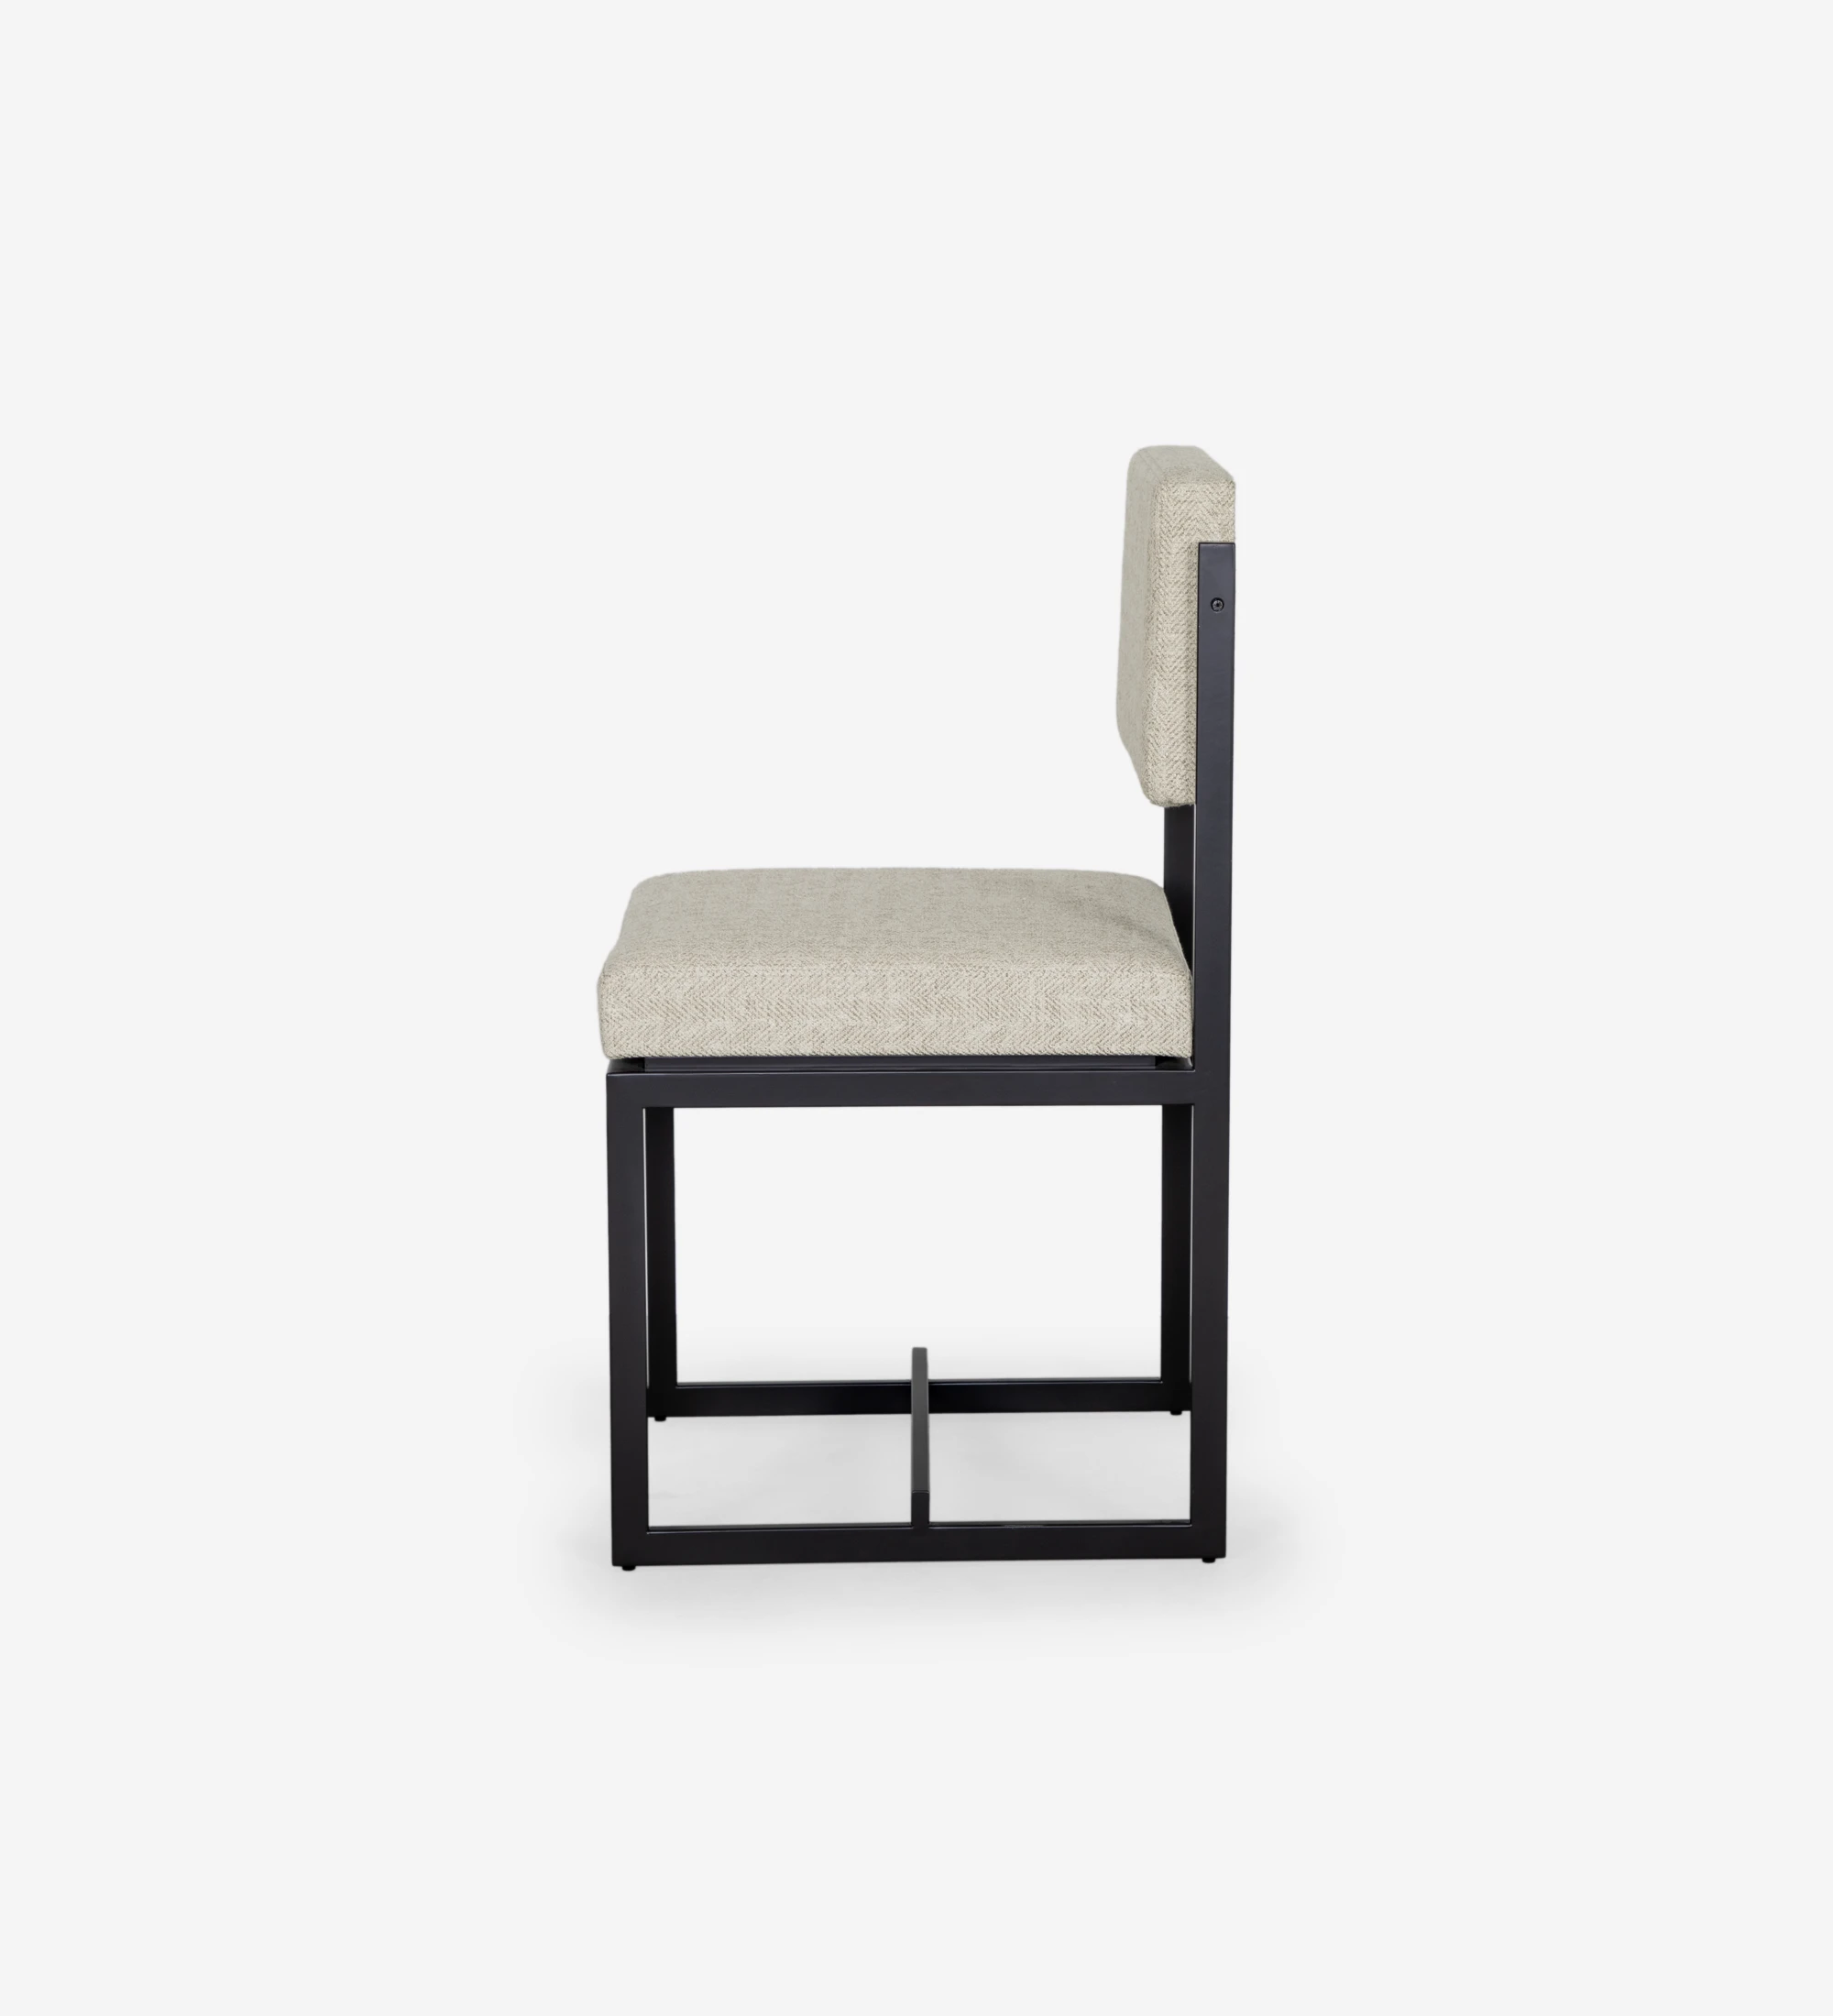 Chair with seat and back upholstered in fabric, with black lacquered metal structure